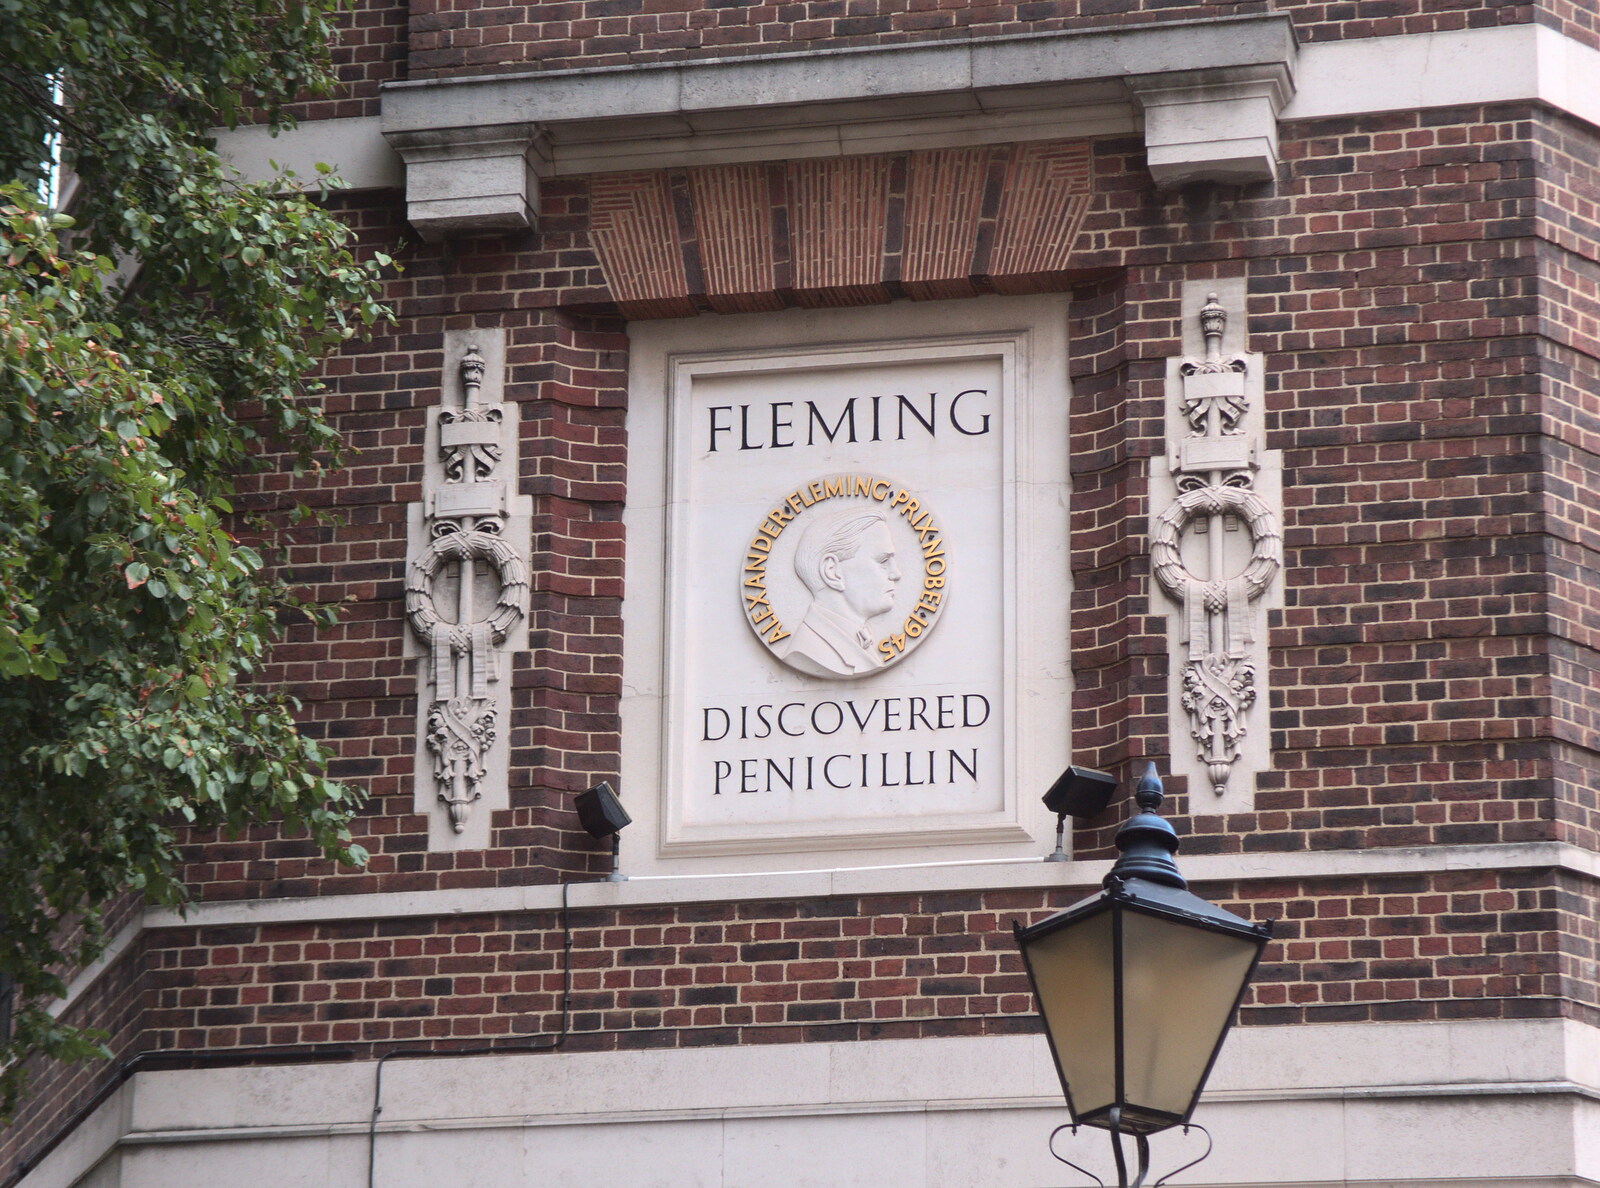 We pass Fleming's gaff on the way to Peking Seoul from A Day at Warwick Castle, Warwickshire - 8th September 2018